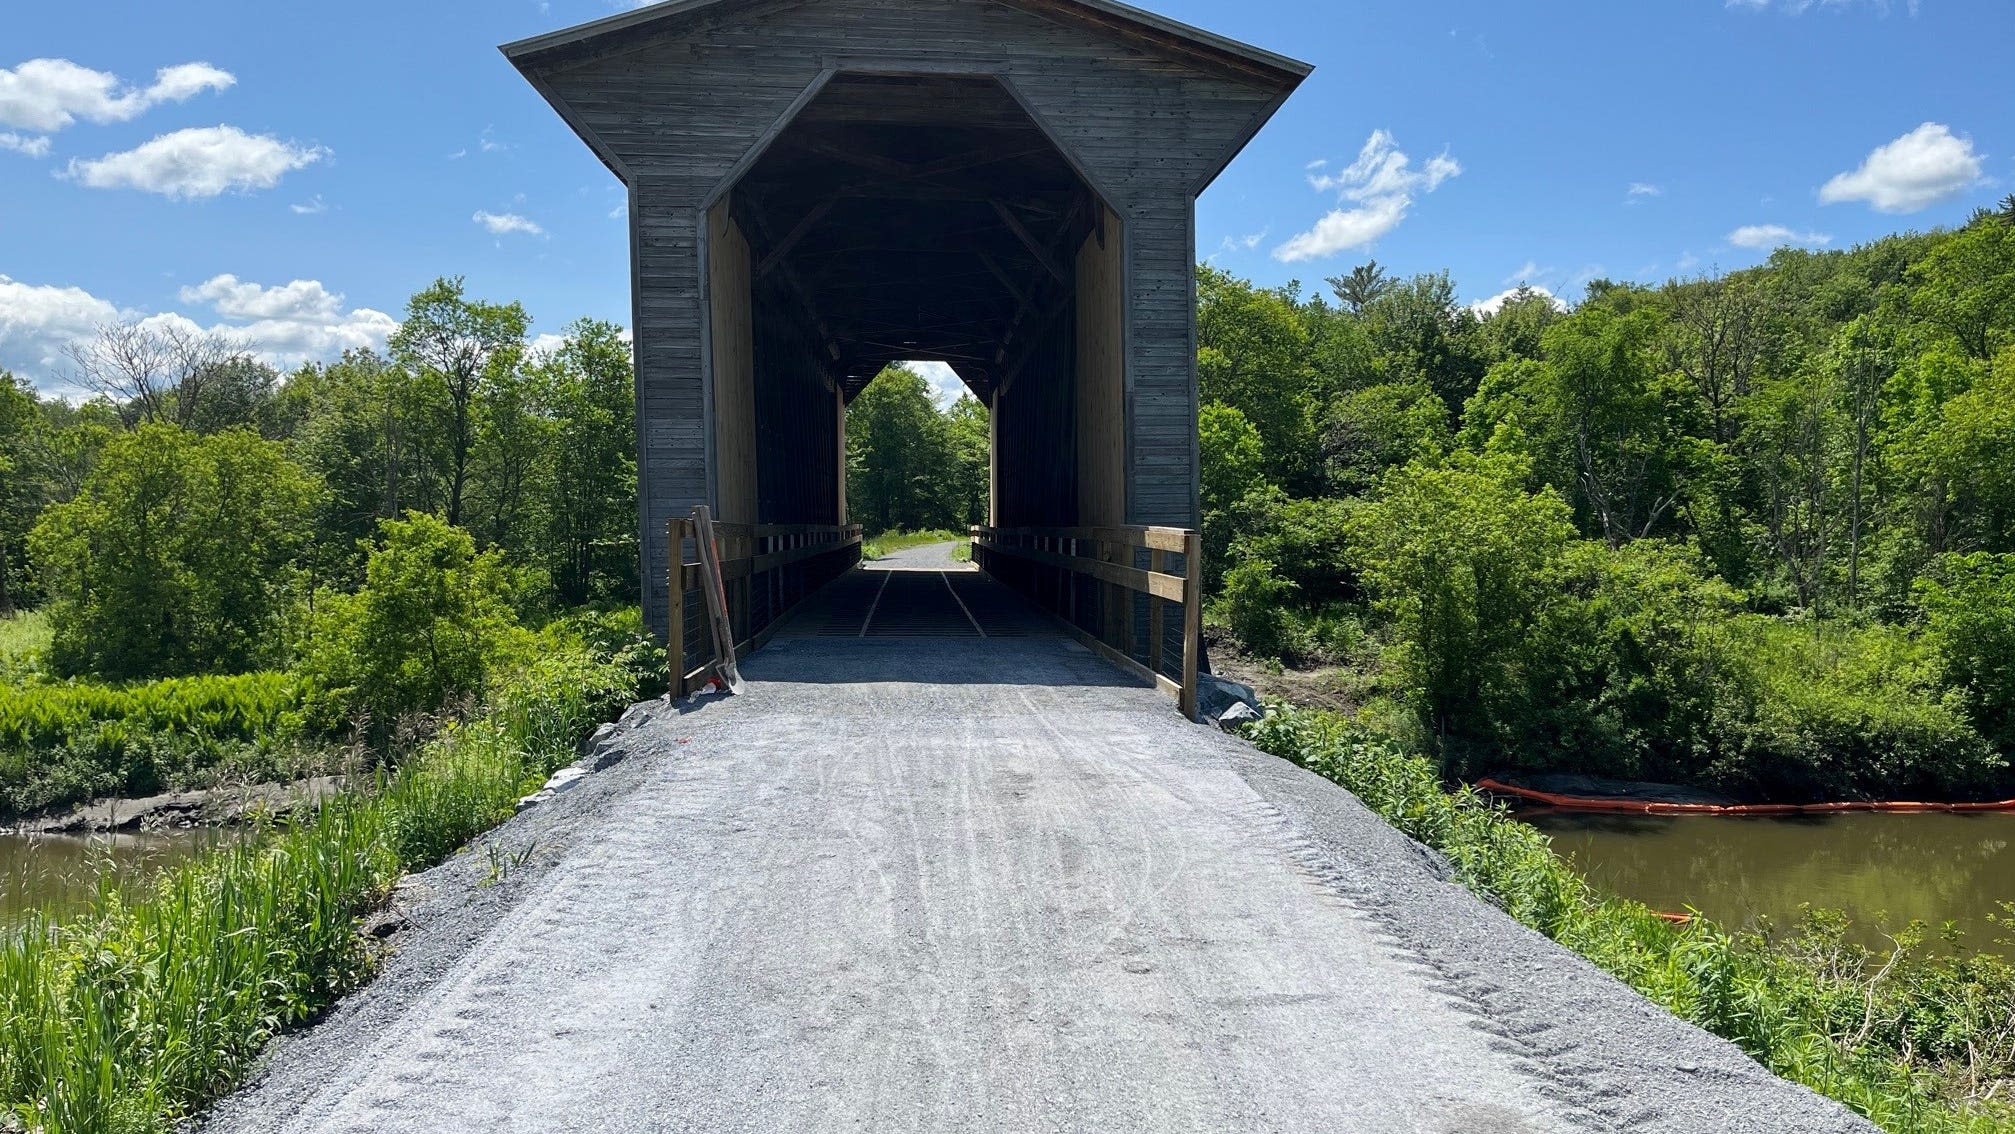 Covered bridges are a part of Vermont's landscape. Here are several worth checking out